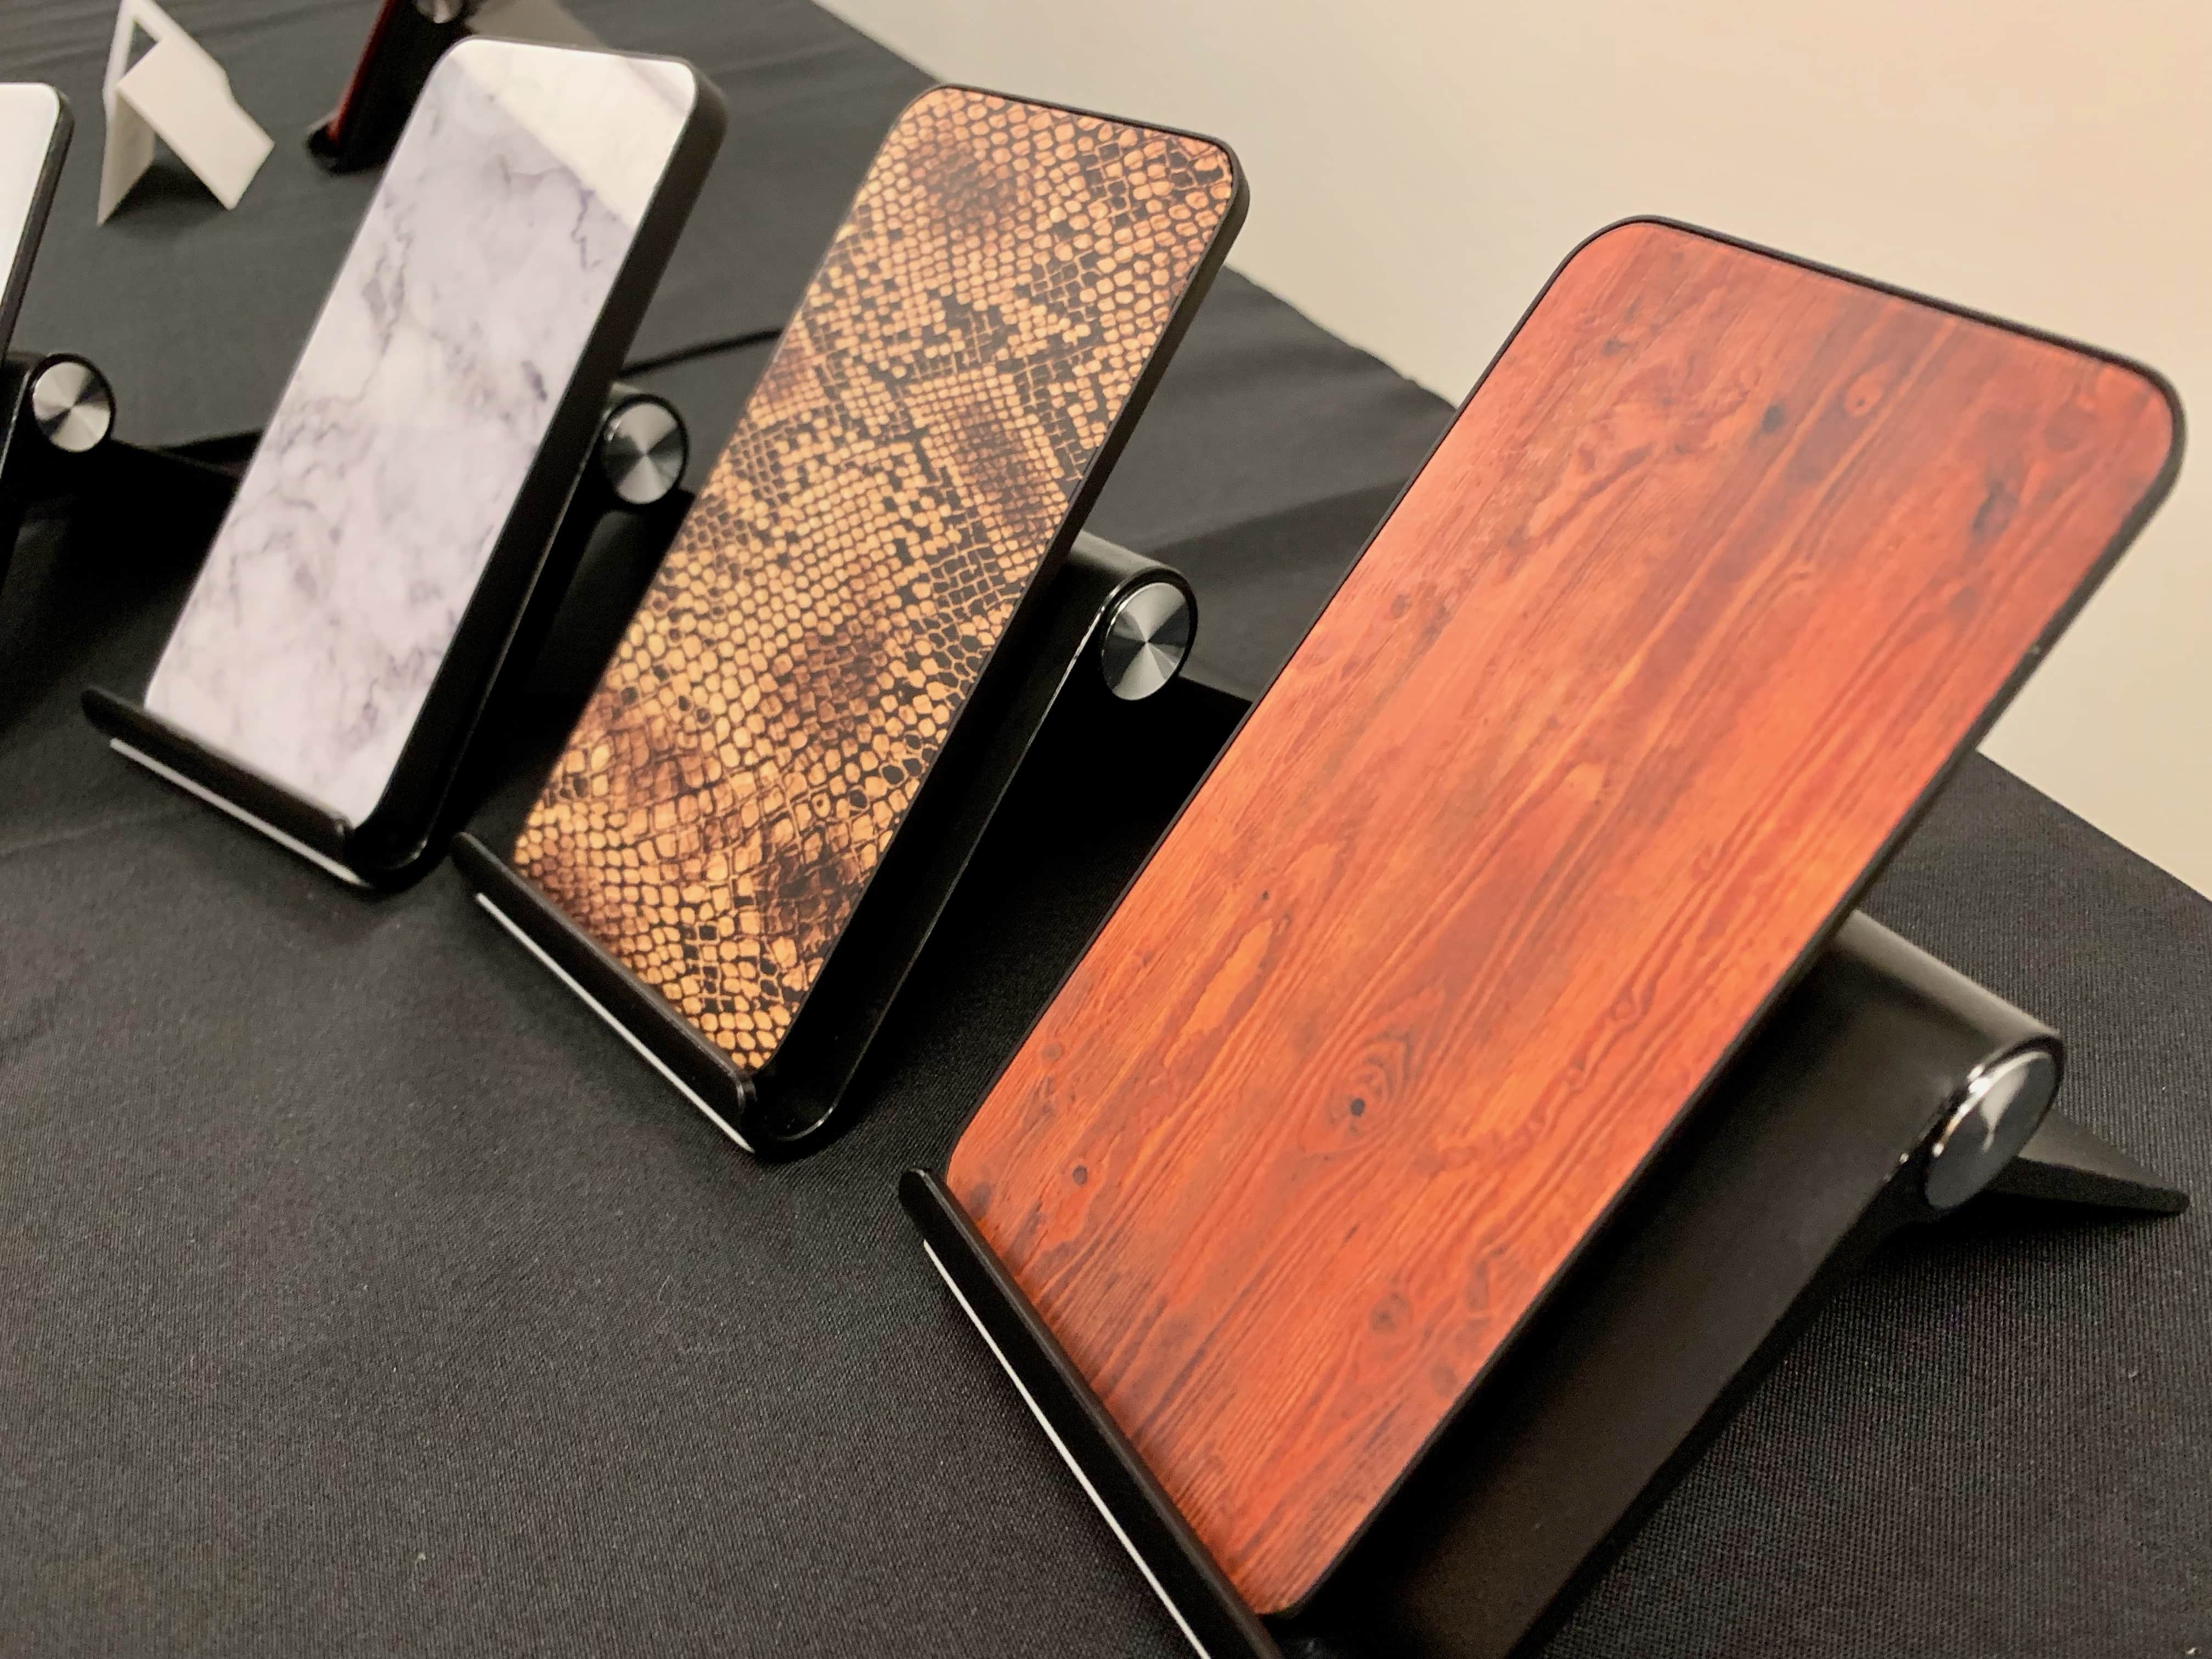 Gorilla Glass in fake wood, snakeskin and marble